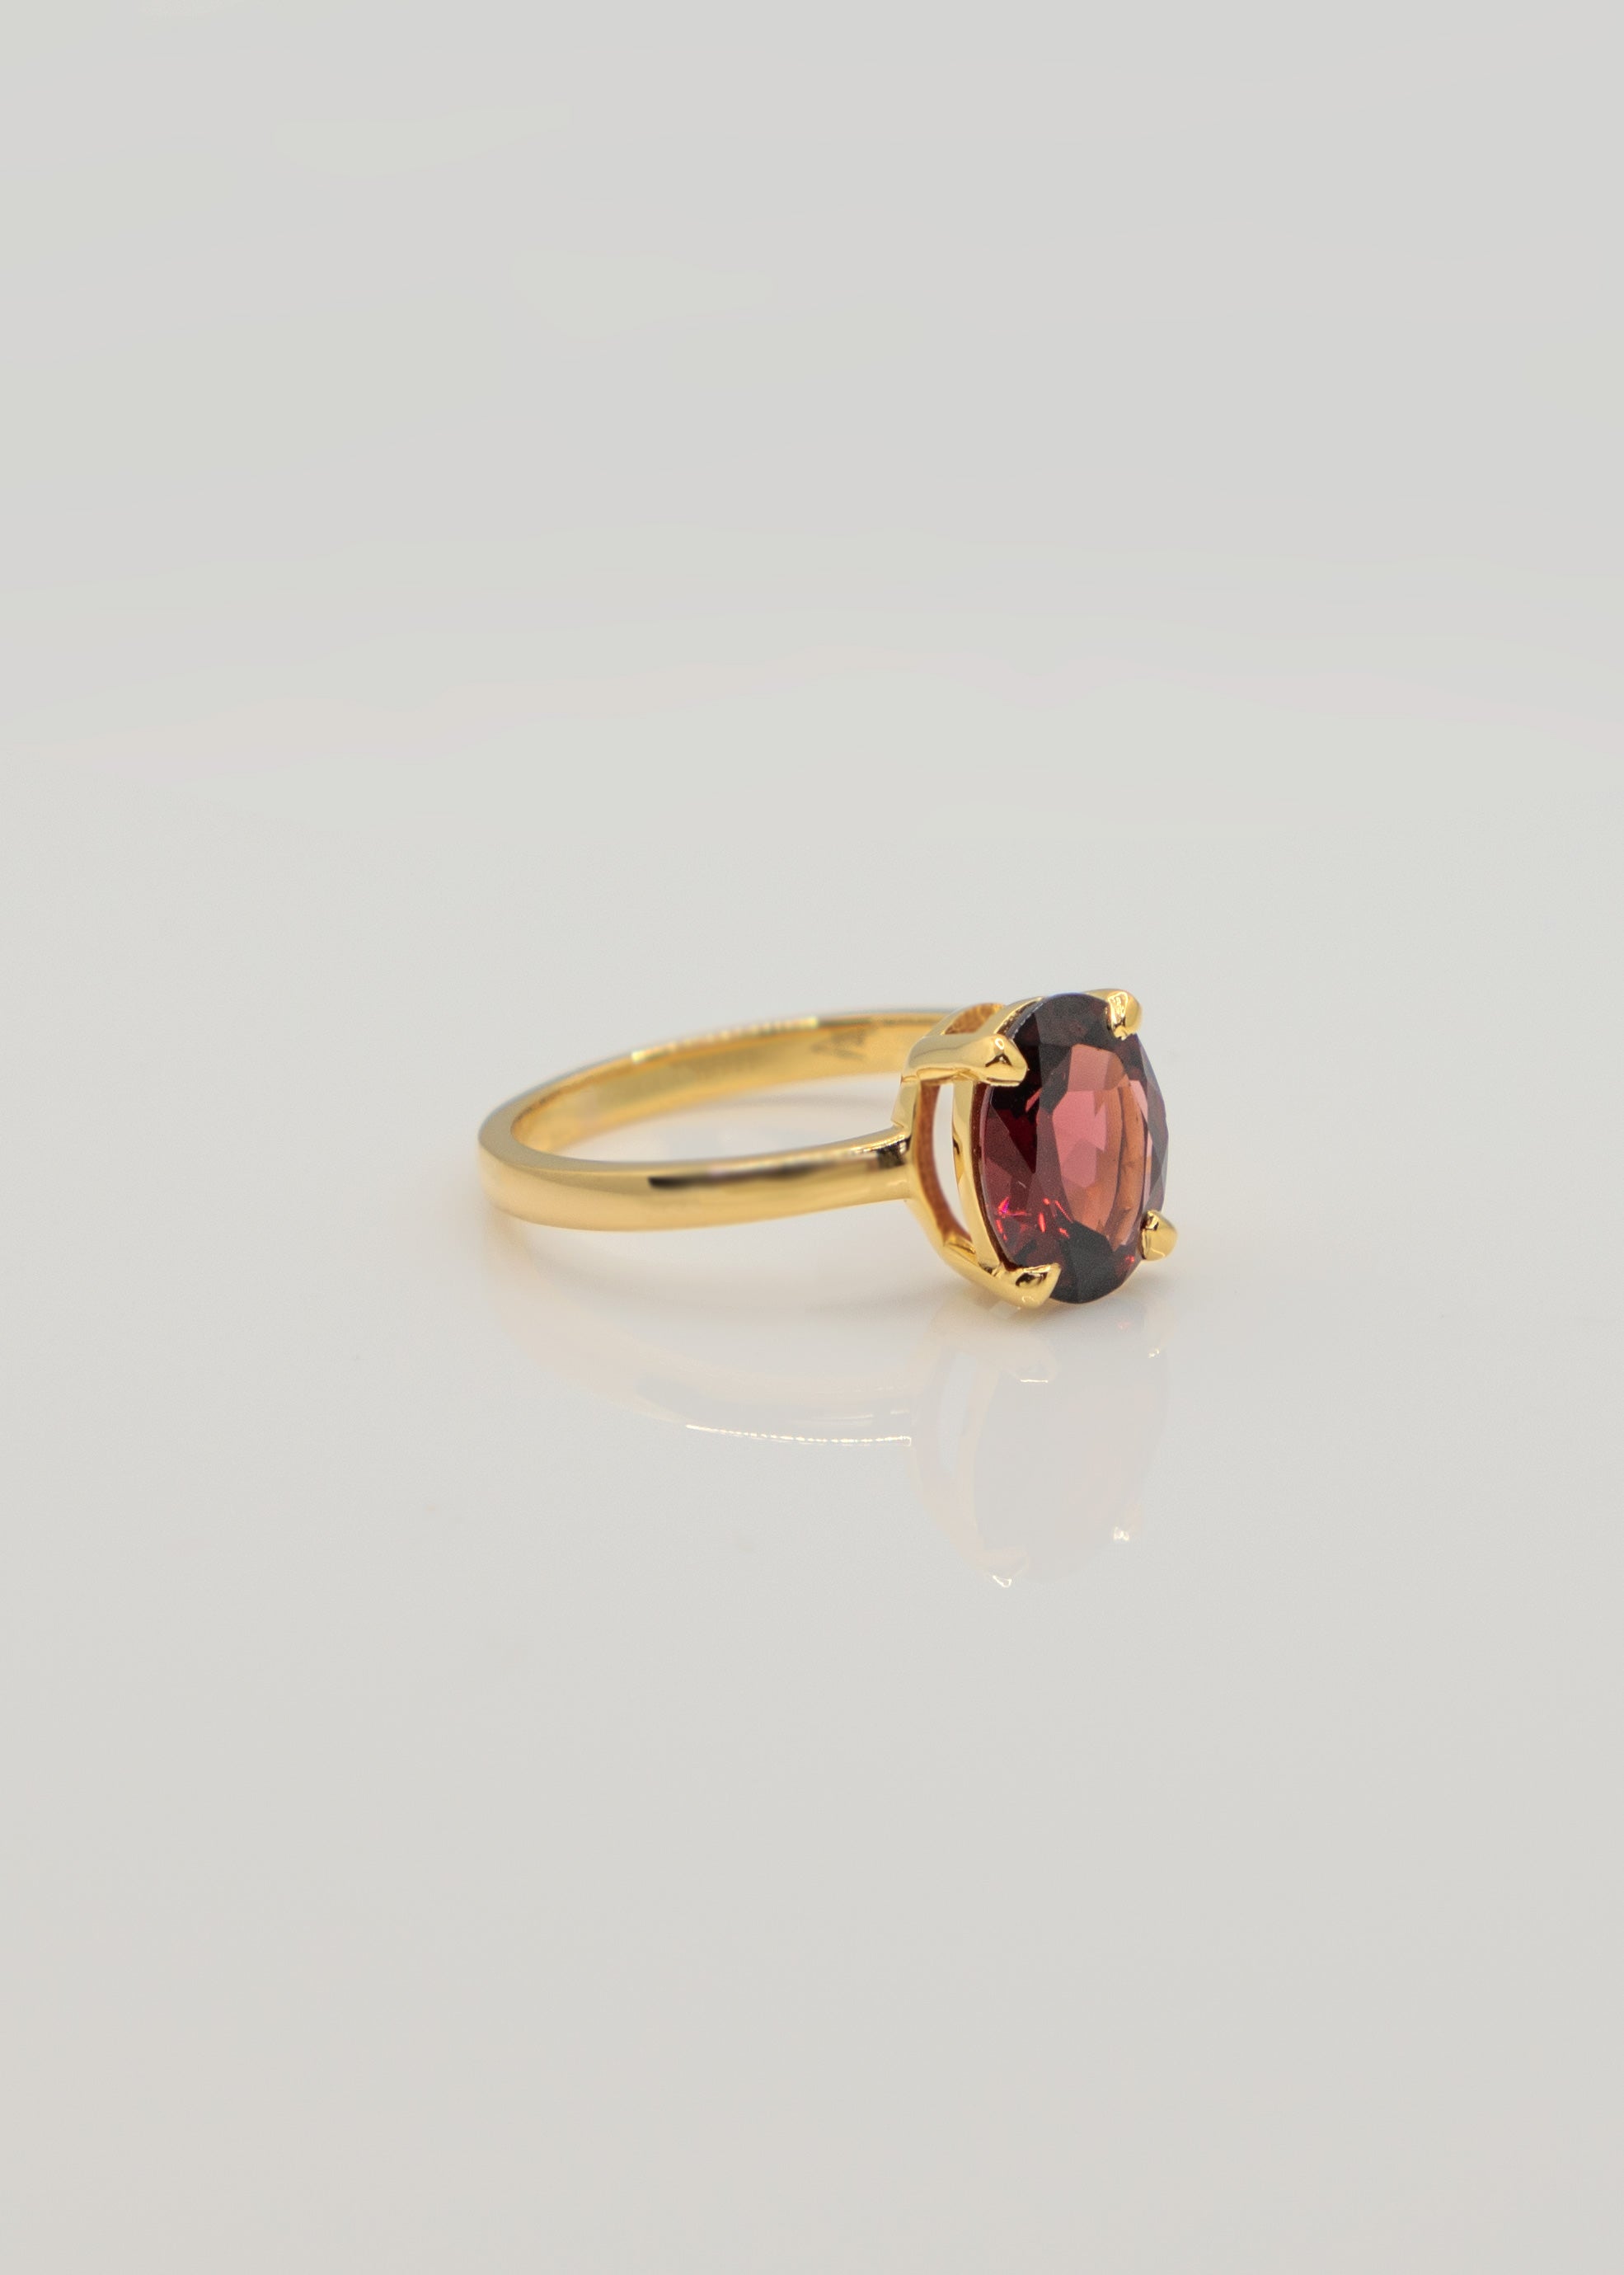 Genuine Red Garnet Natural Gemstone Gold Plated Vermeil high quality January birthstone ring gifts for women